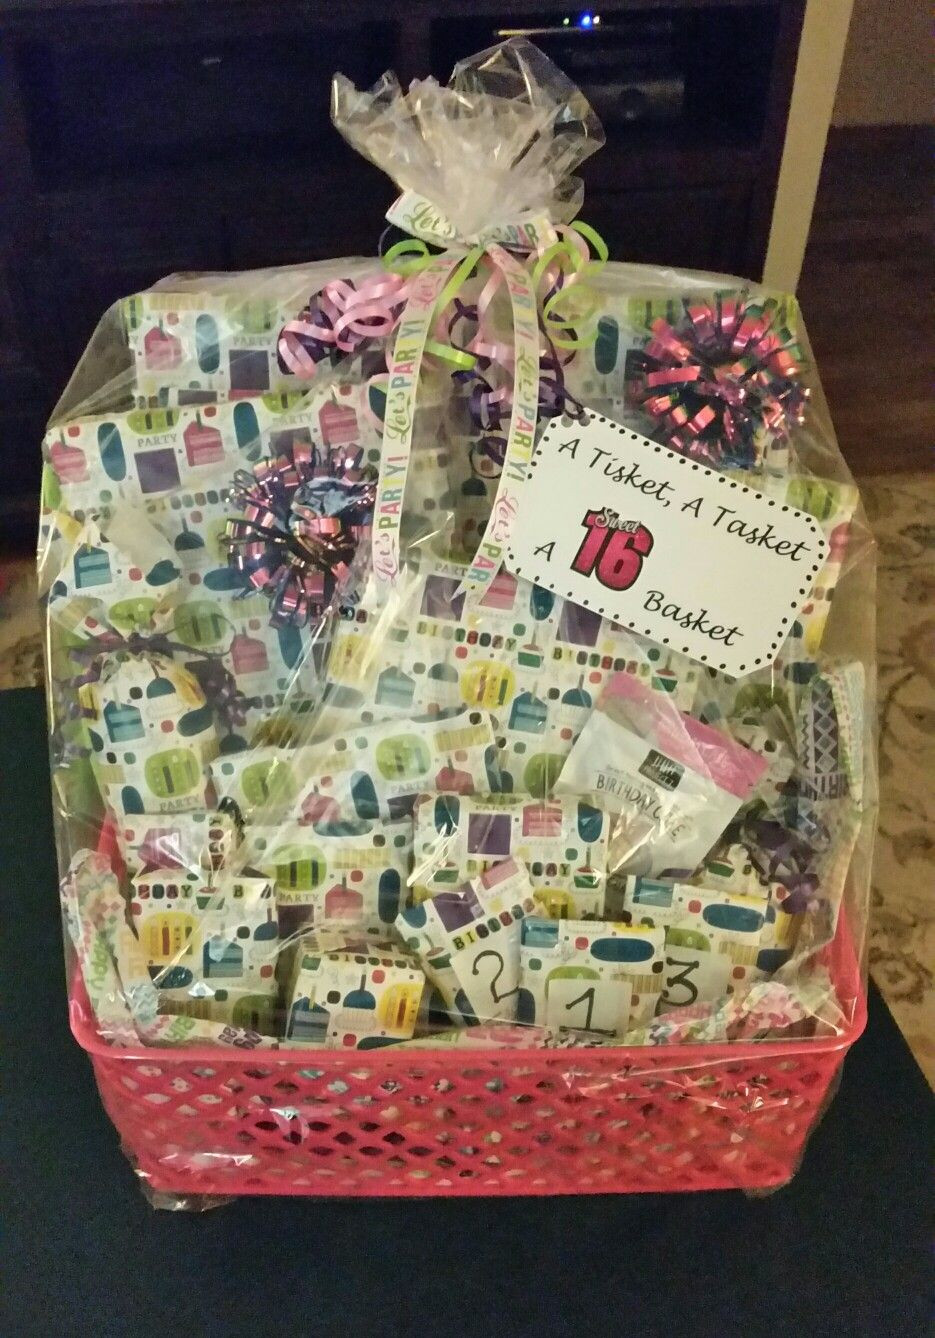 16 Birthday Gift Ideas Girls
 A Tisket A Tasket A Sweet 16 Basket Filled with 16